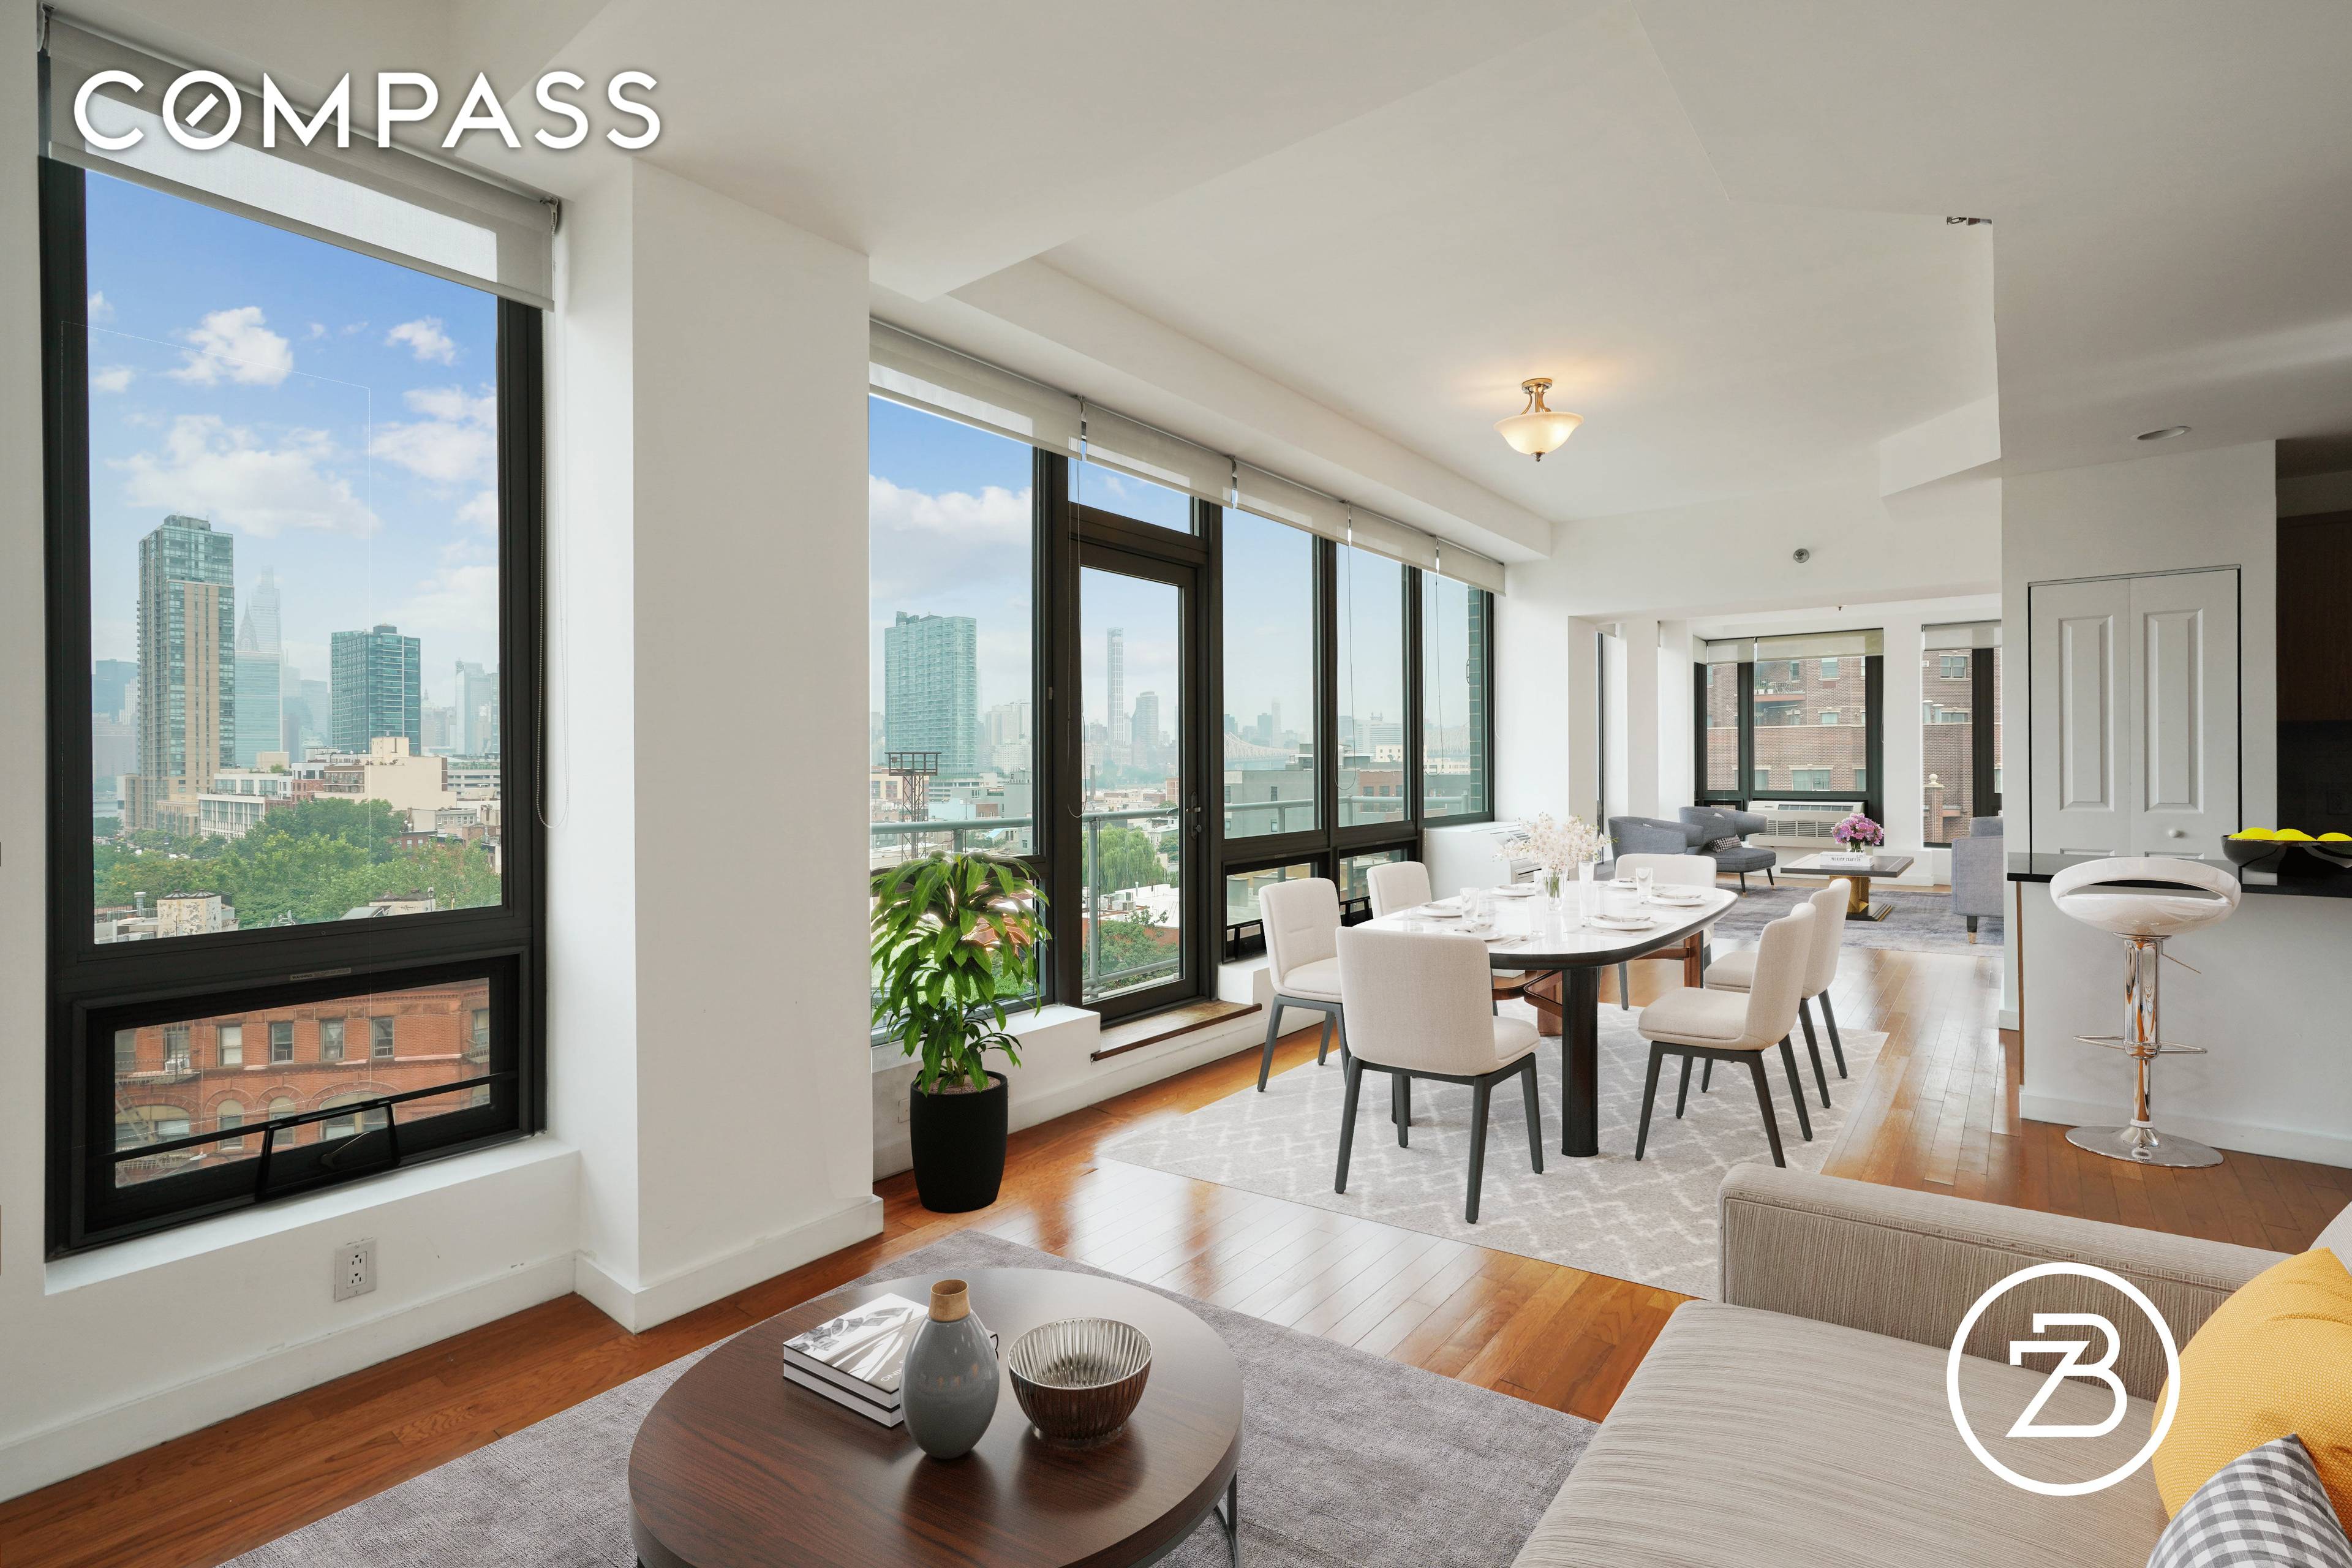 This beautiful, spacious apartment in LIC is a unique find.